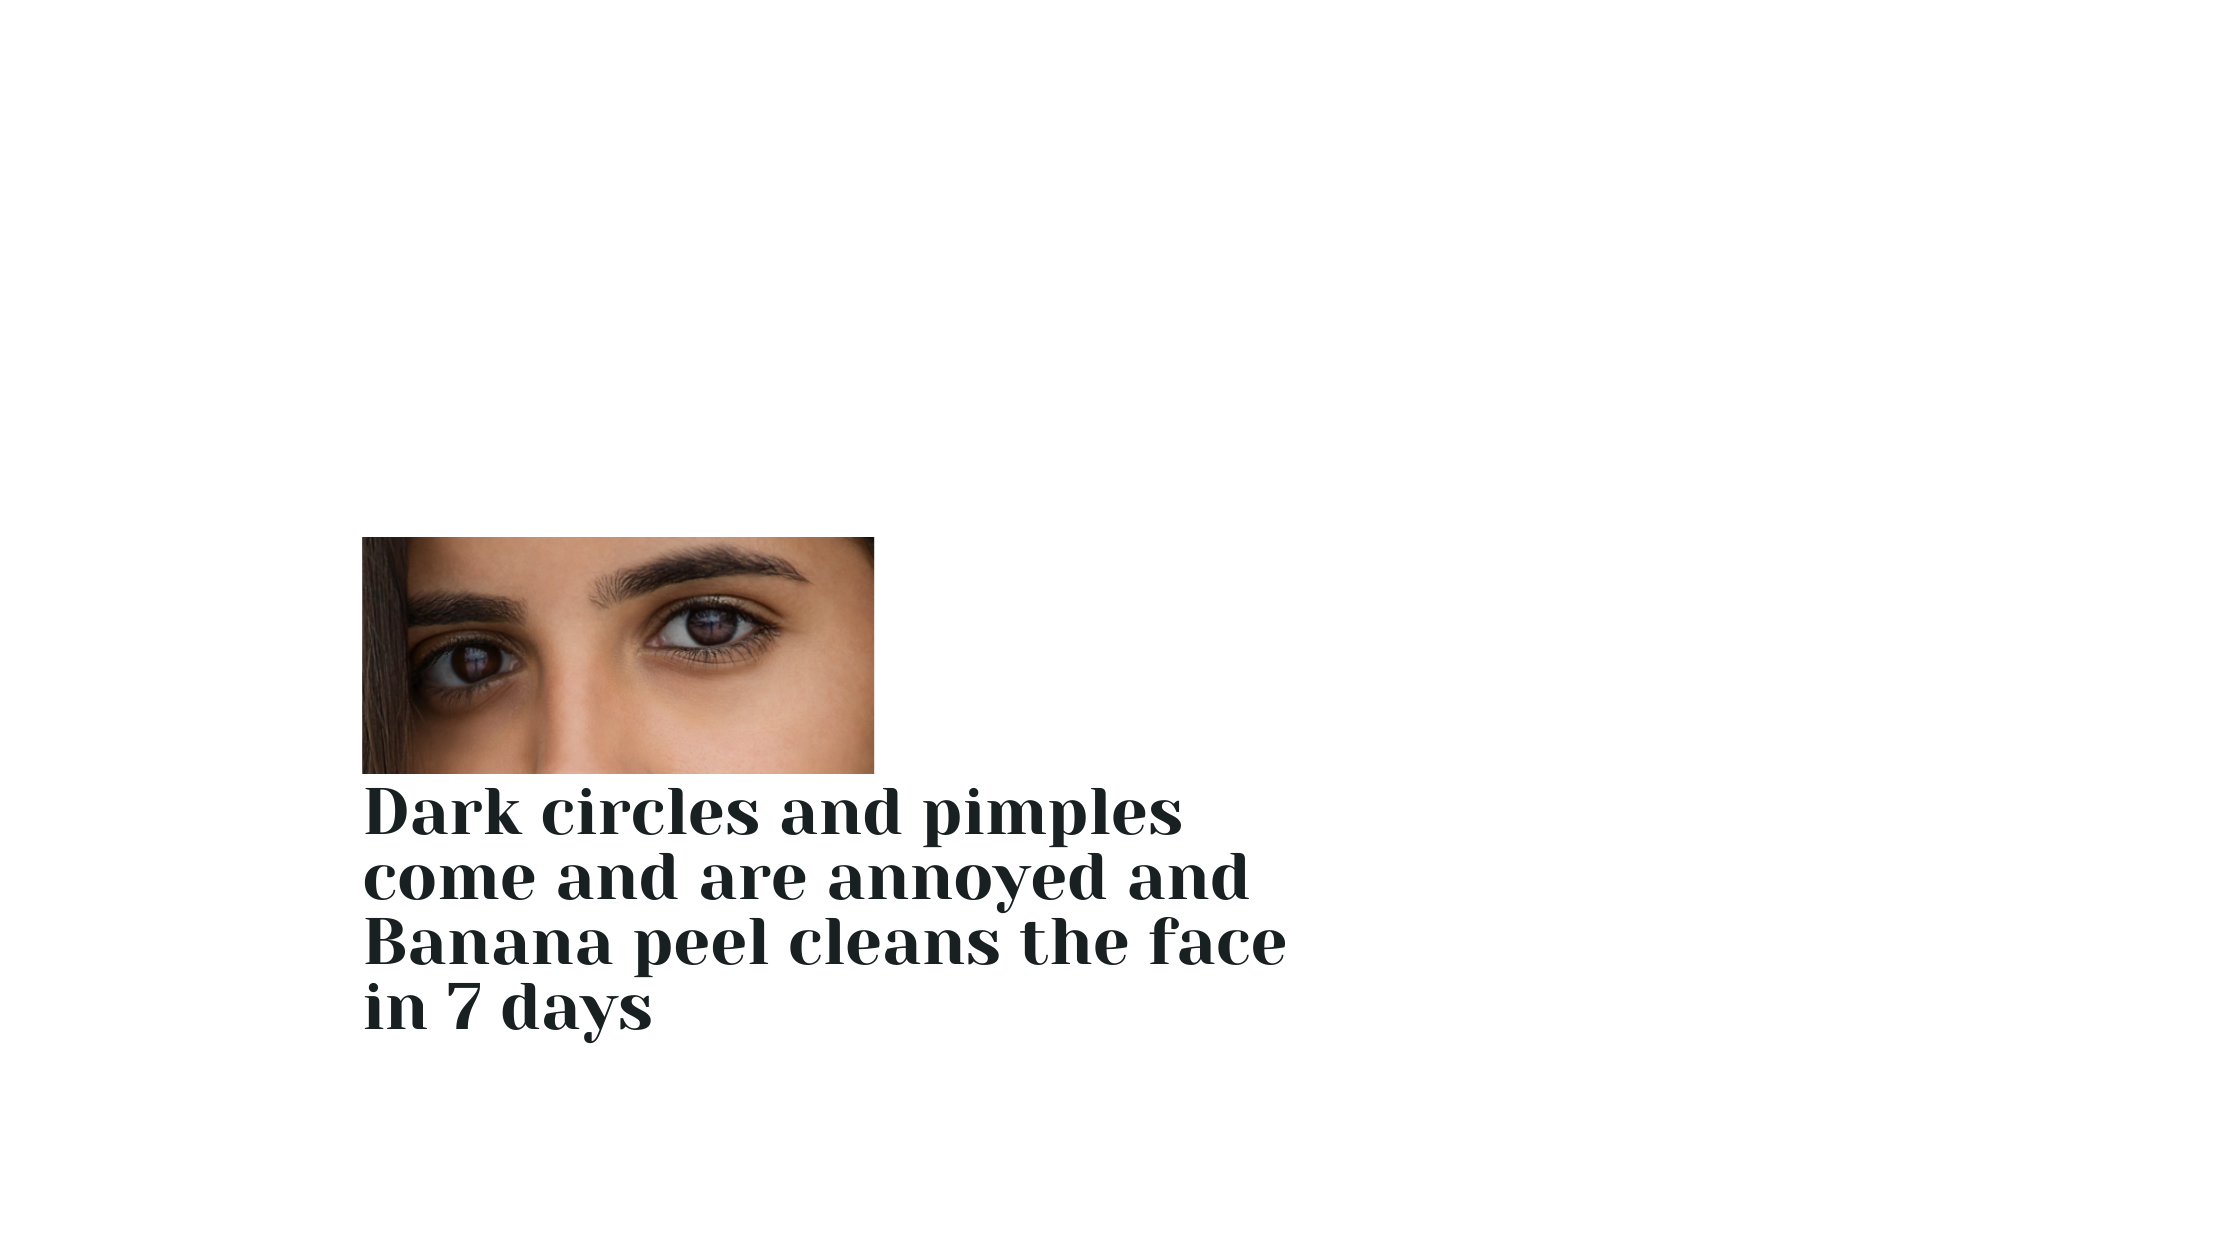 Dark circles and pimples come and are annoyed and Banana peel cleans the face in 7 days